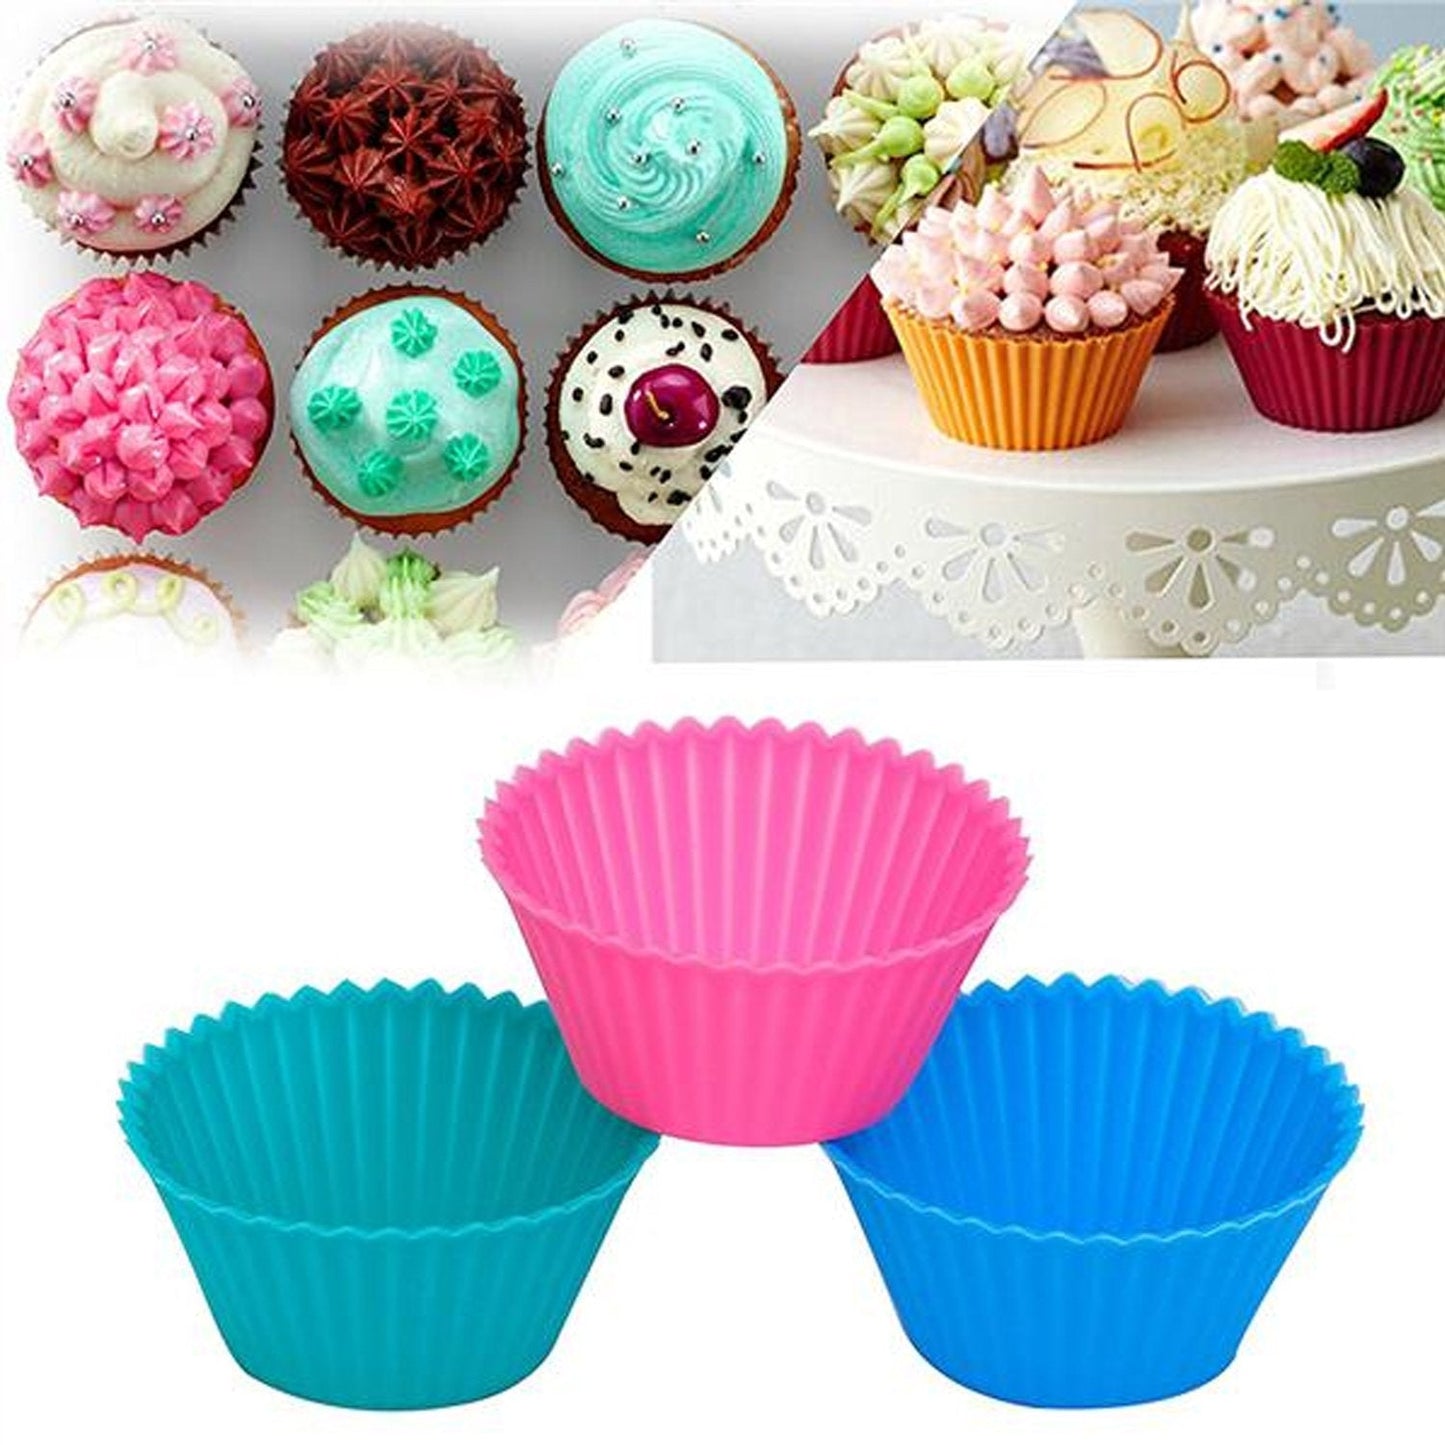 Silicone Cupcake Shaped Baking Mold Fondant Cake Tool Chocolate Candy Cookies Pastry Soap Moulds (6 Pc)